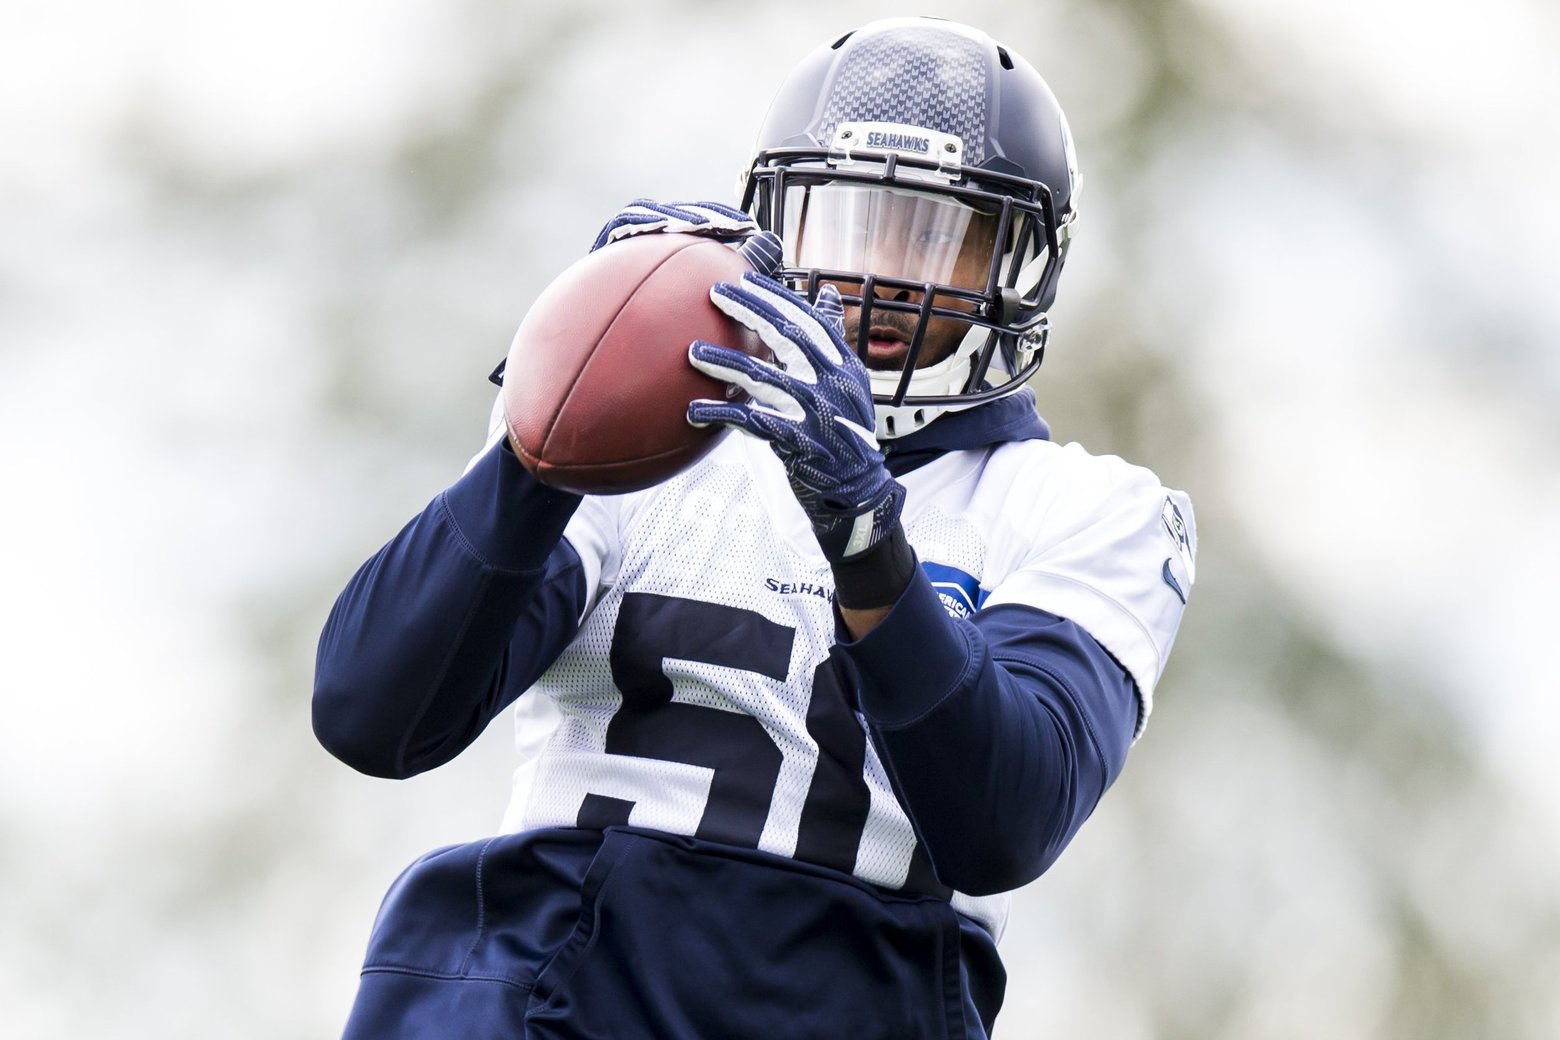 Seahawks’ K.J. Wright shows there’s another way to handle impending free agency